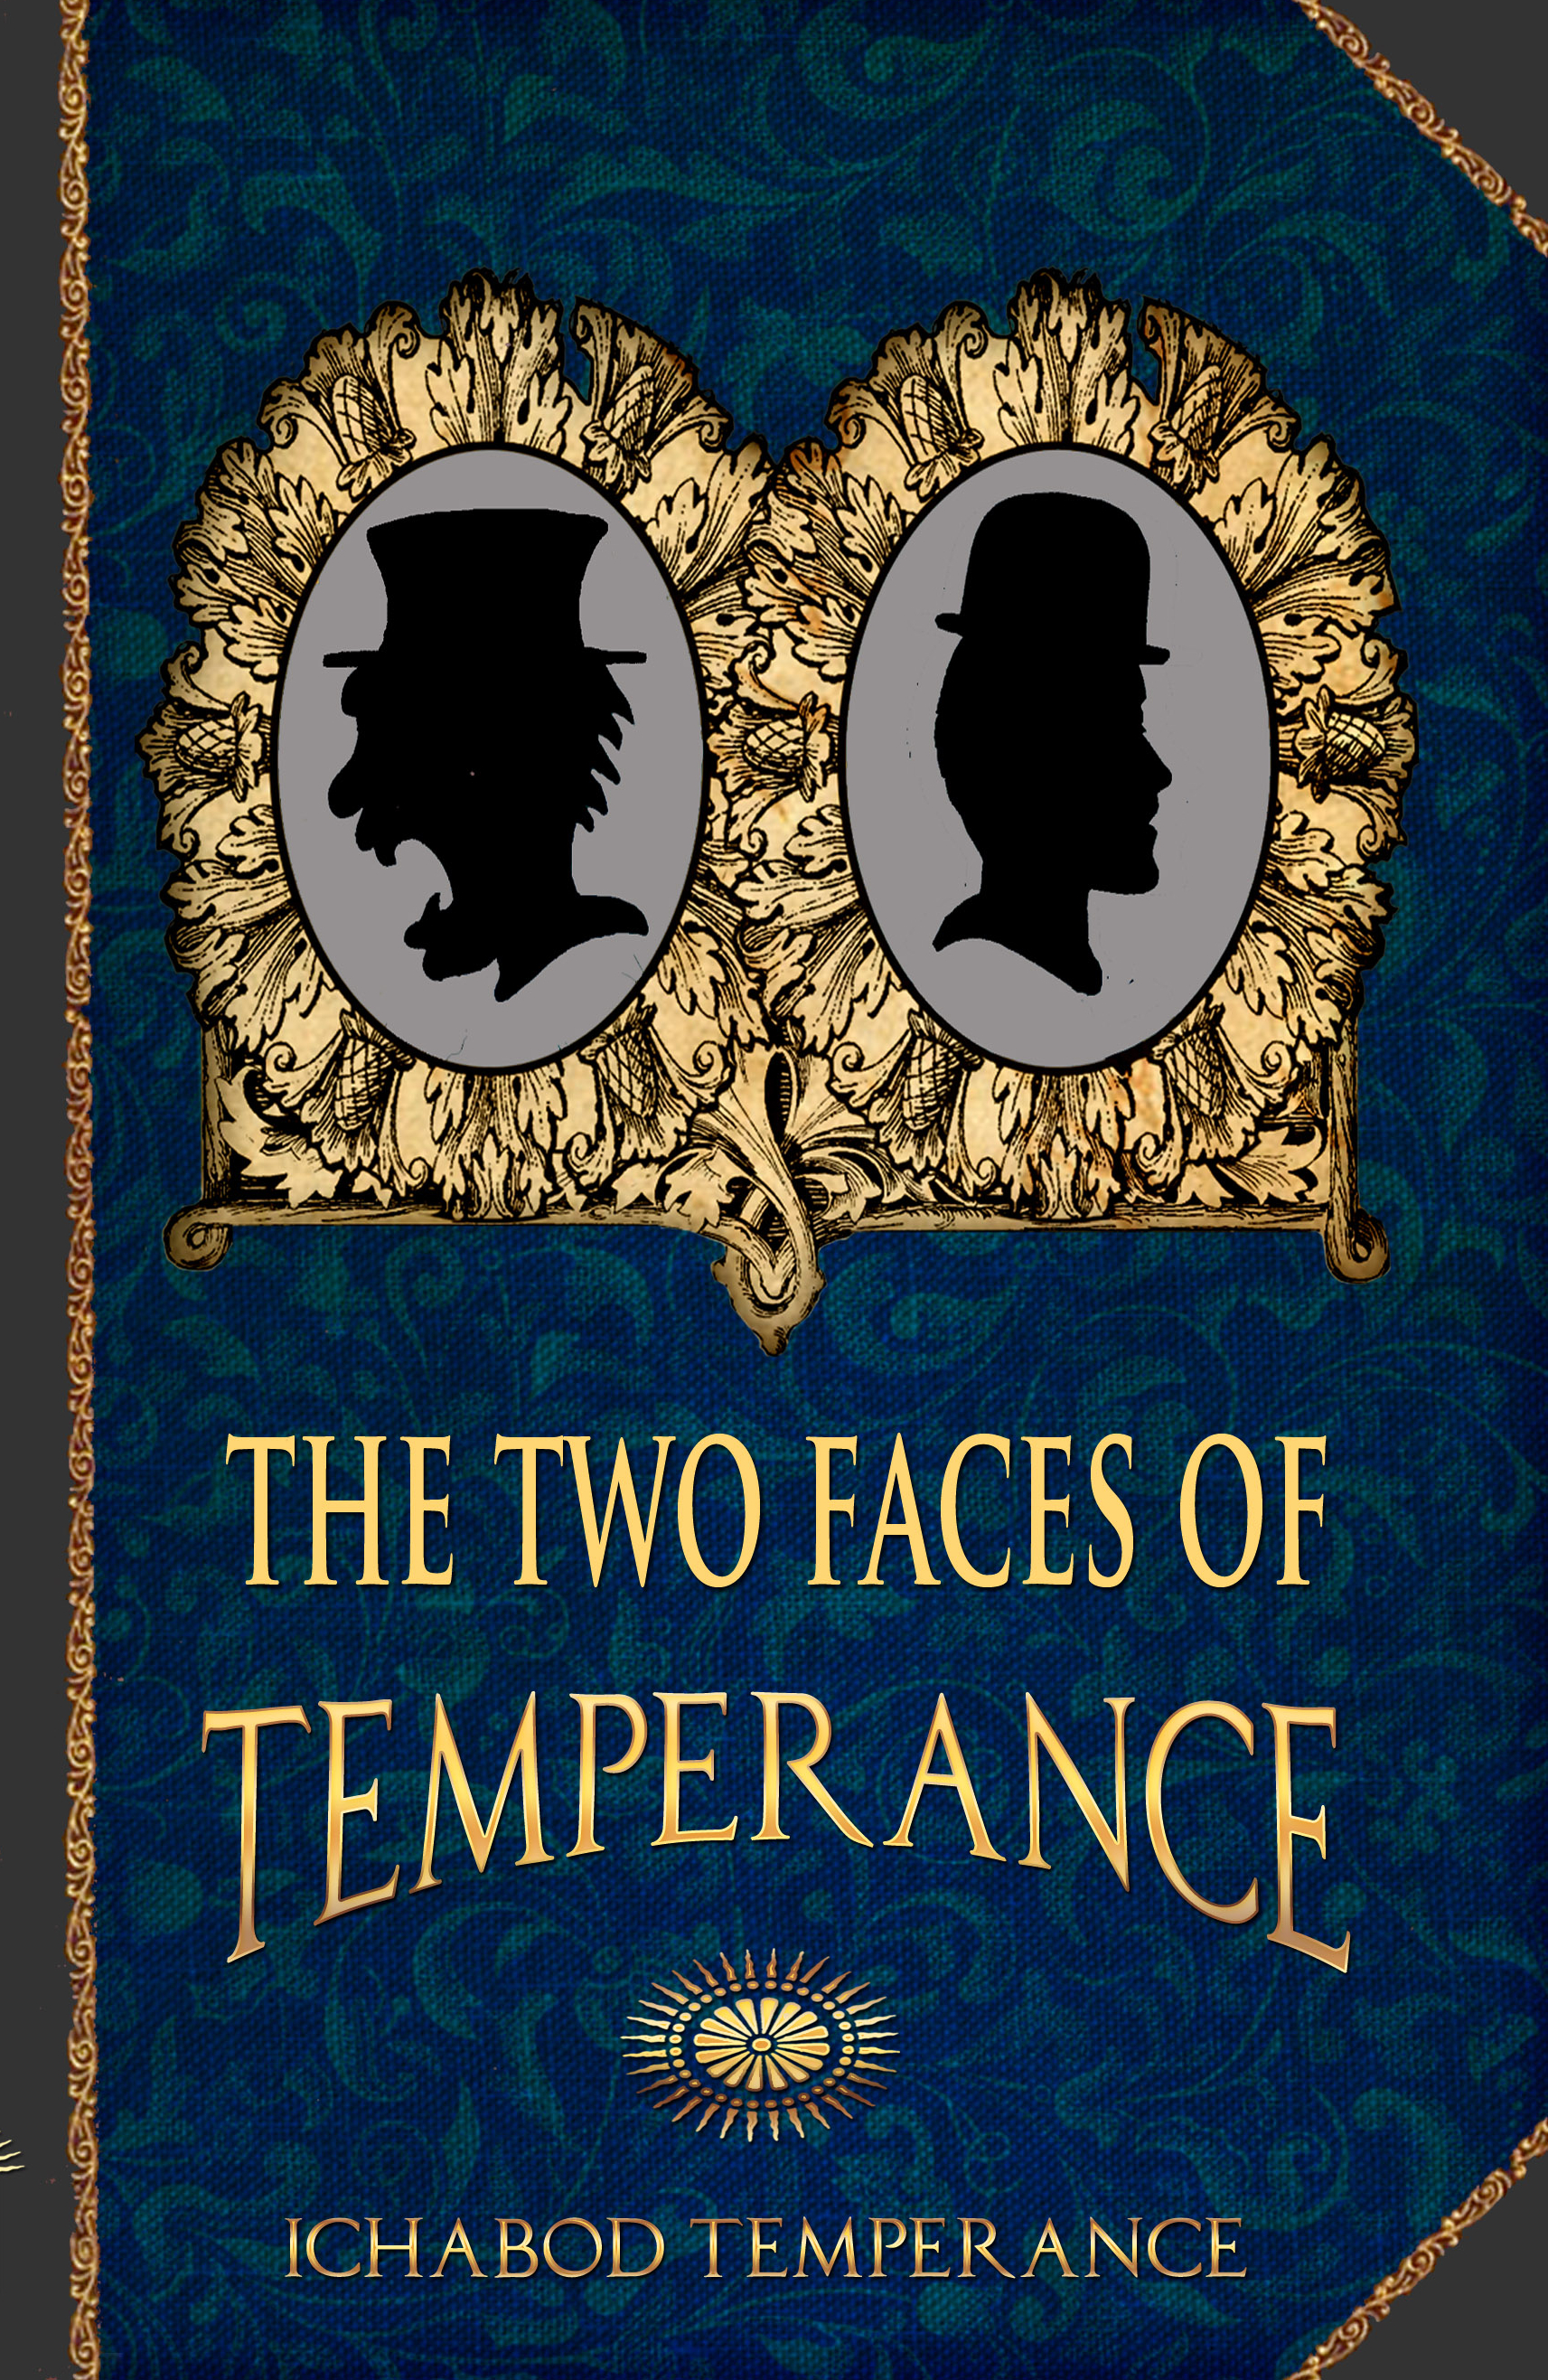 December 2016 New Release The Two Faces Of Temperance Ichabod